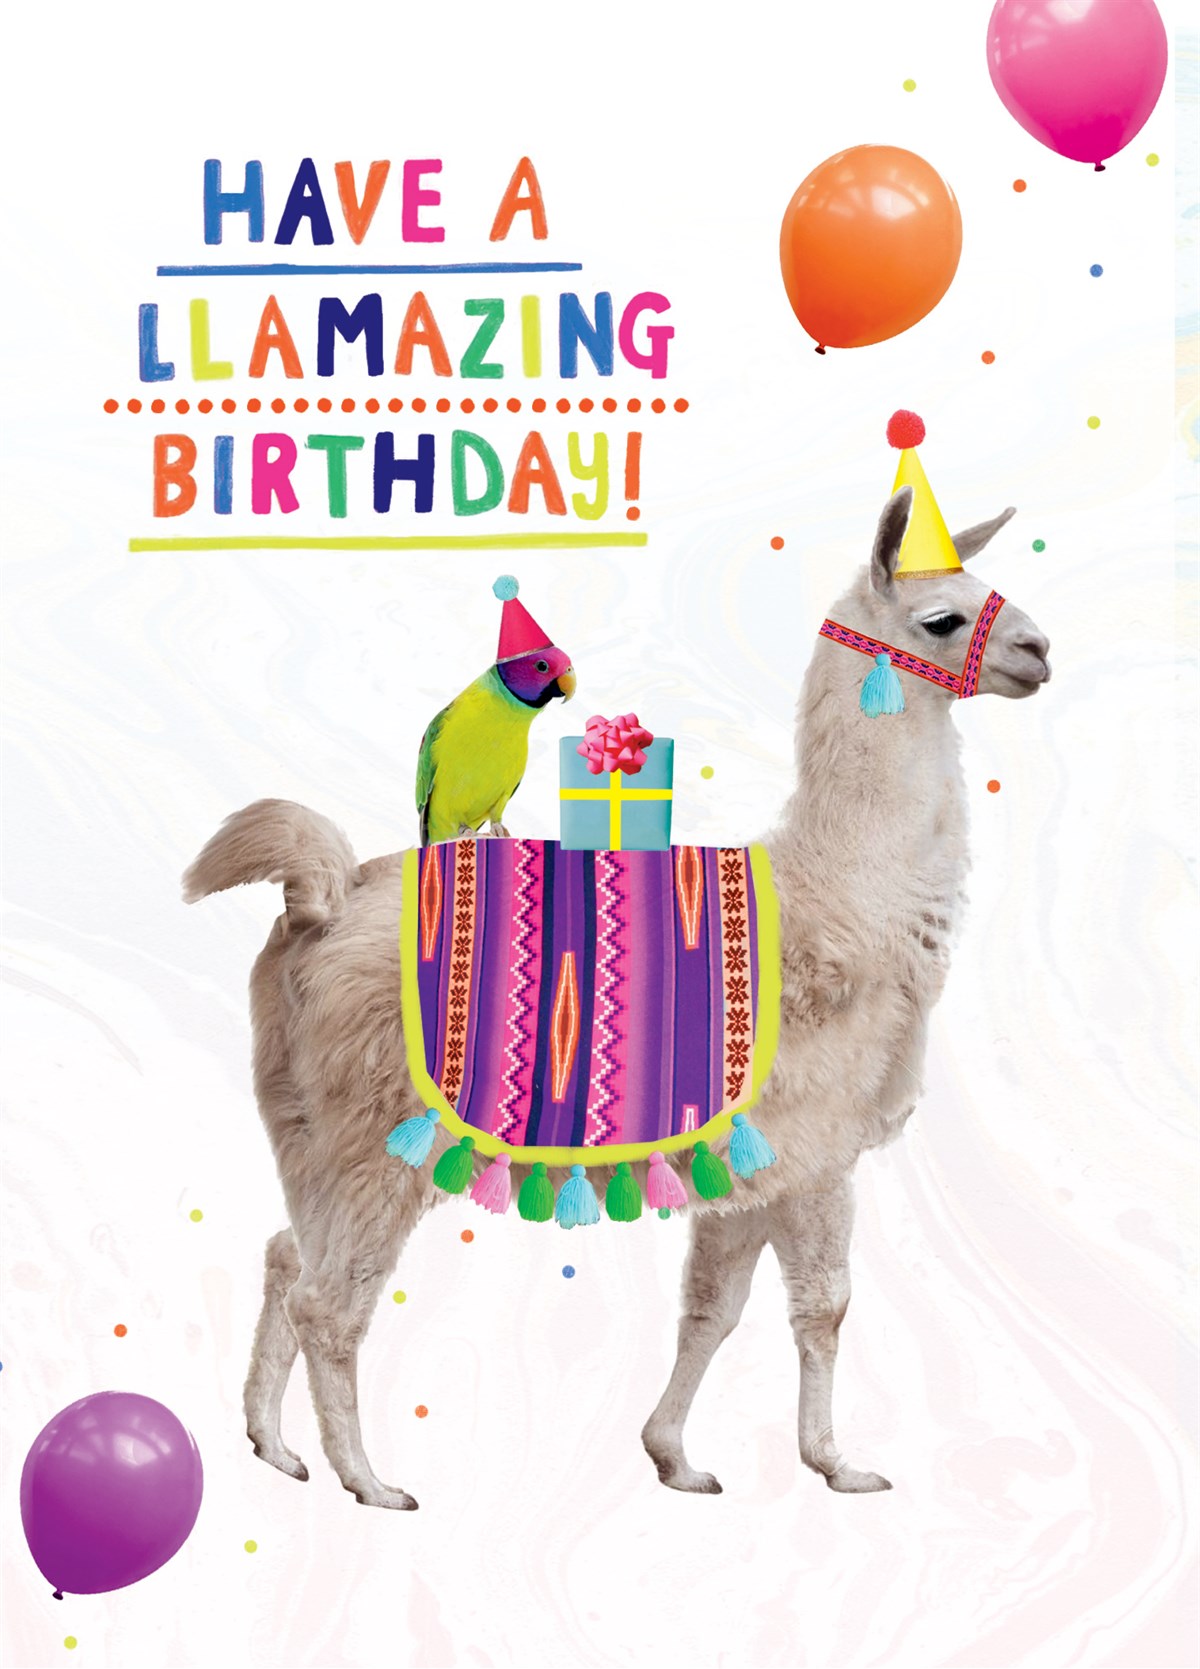 Woman Fabulous Llama with Presents and Balloons Birthday Card for Her